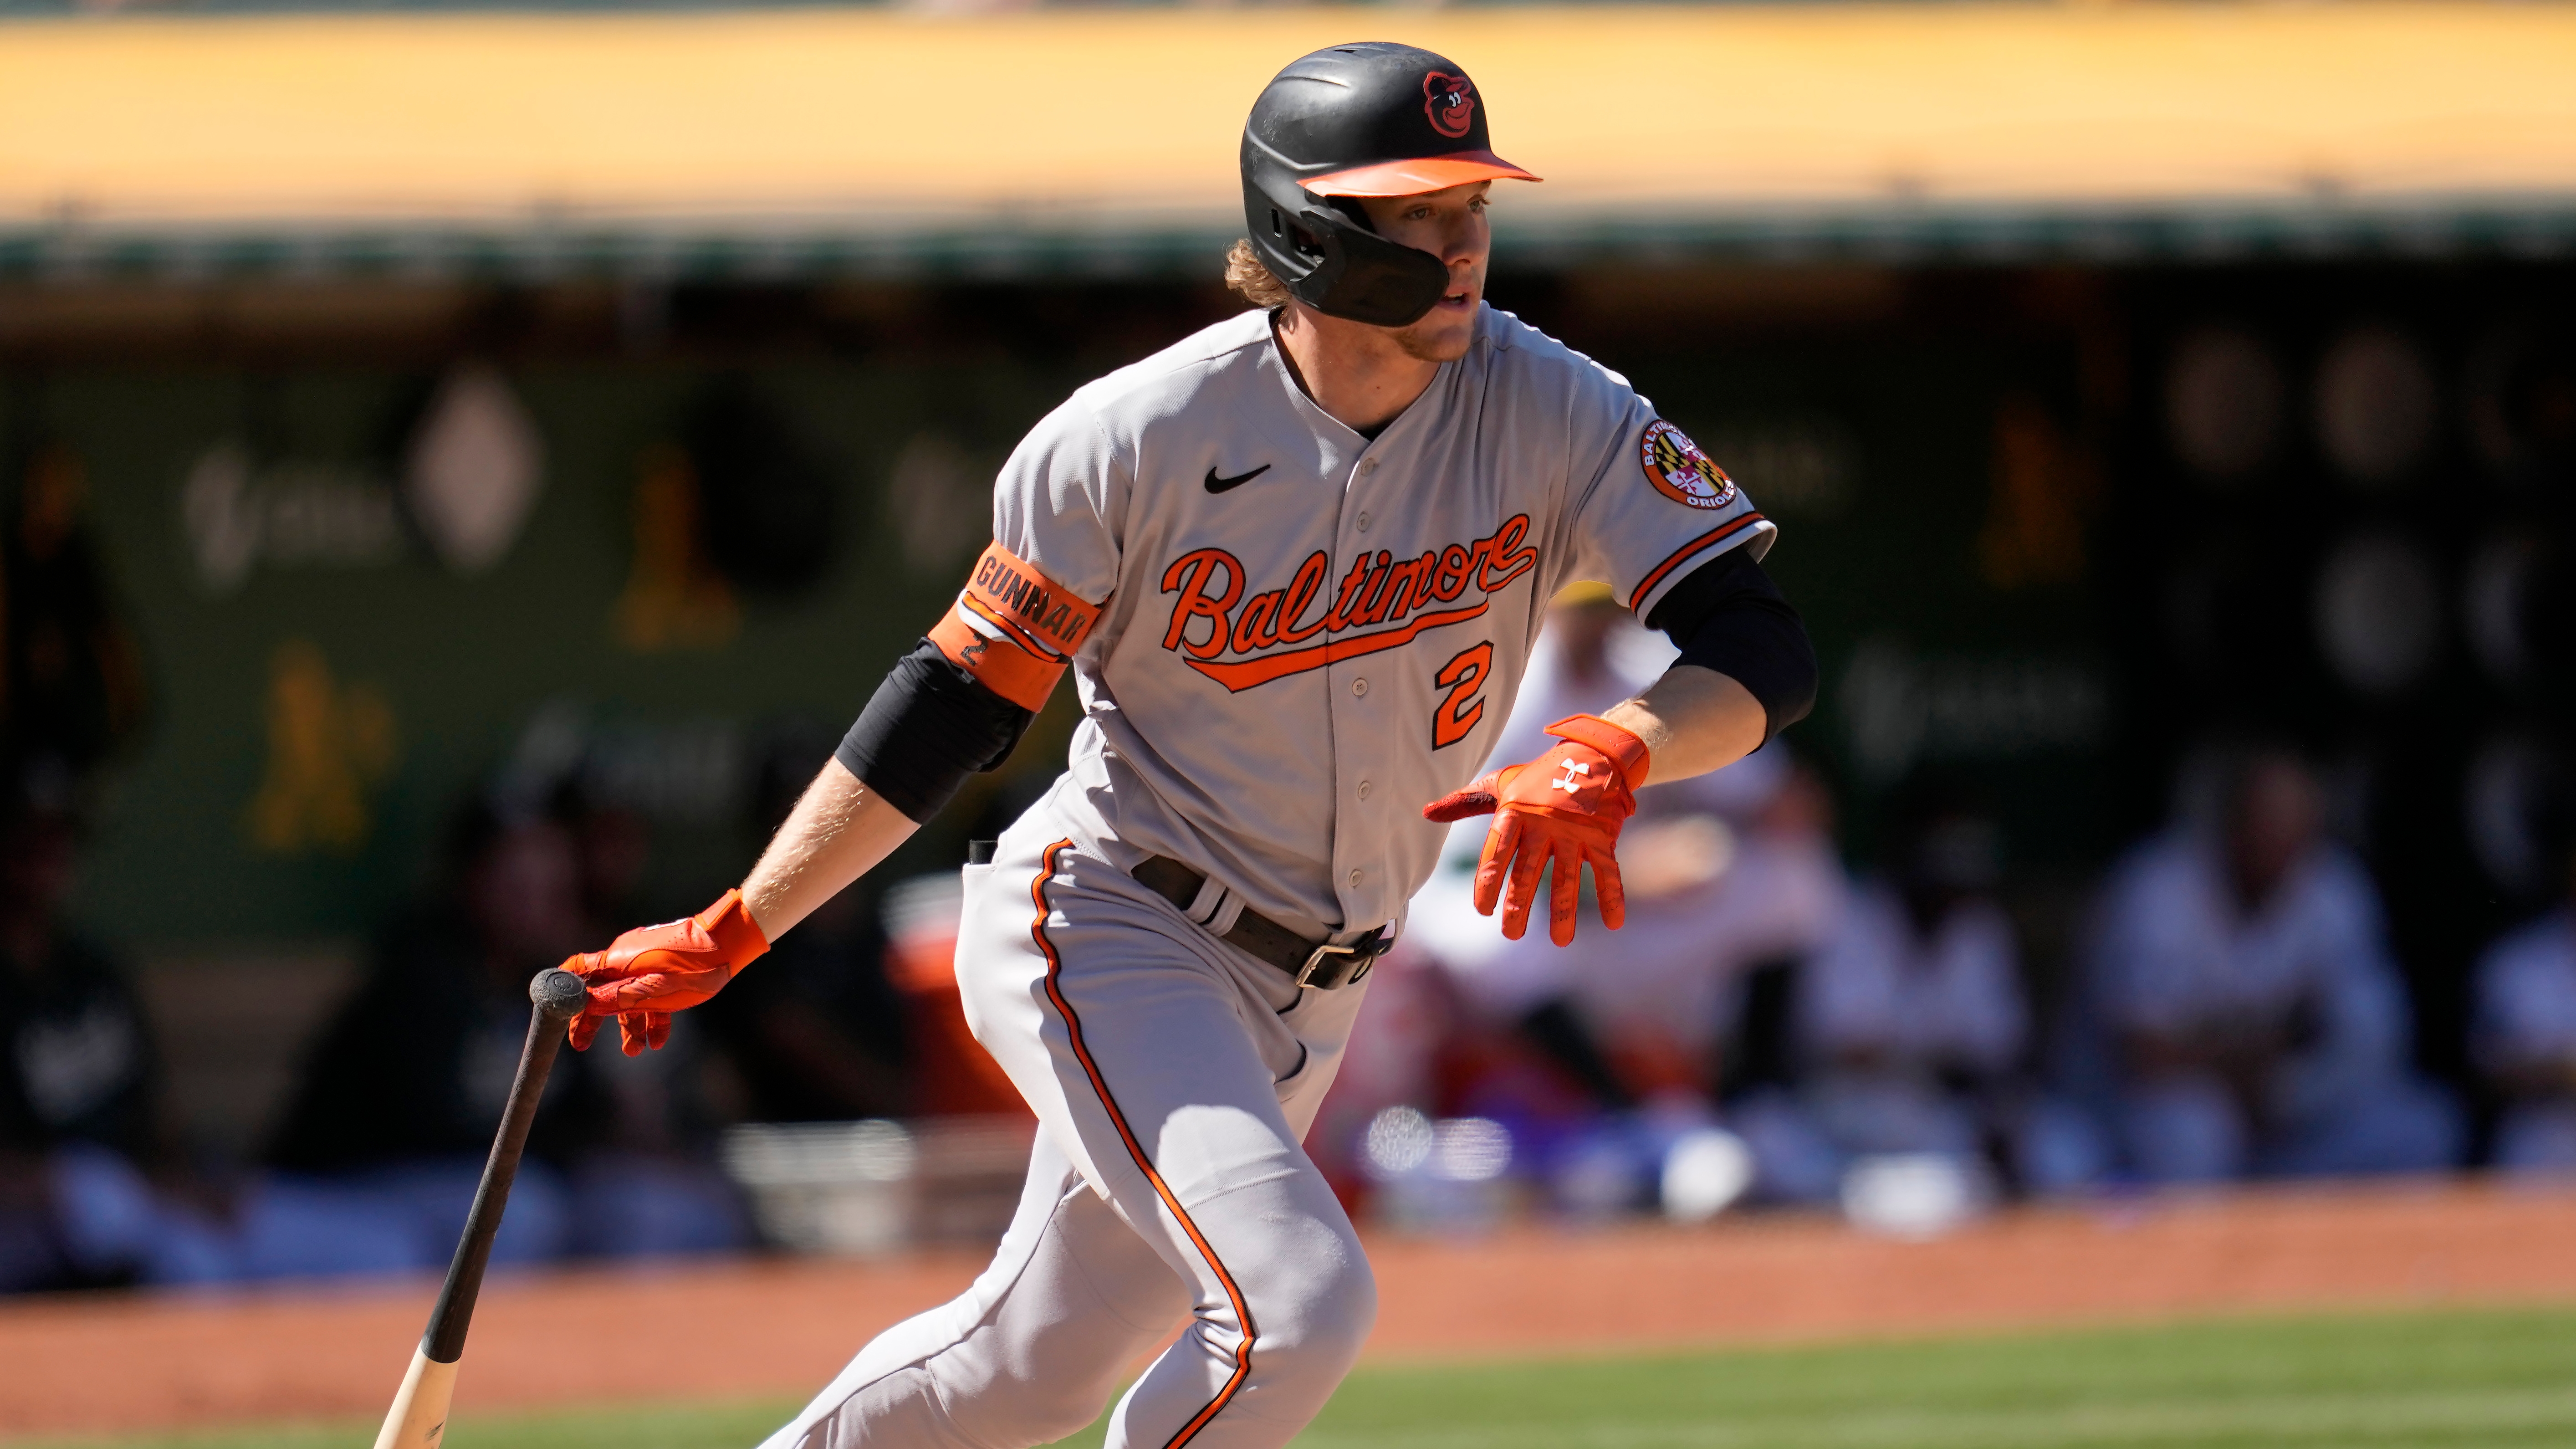 The Orioles' new City Connect uniforms are sparking debate